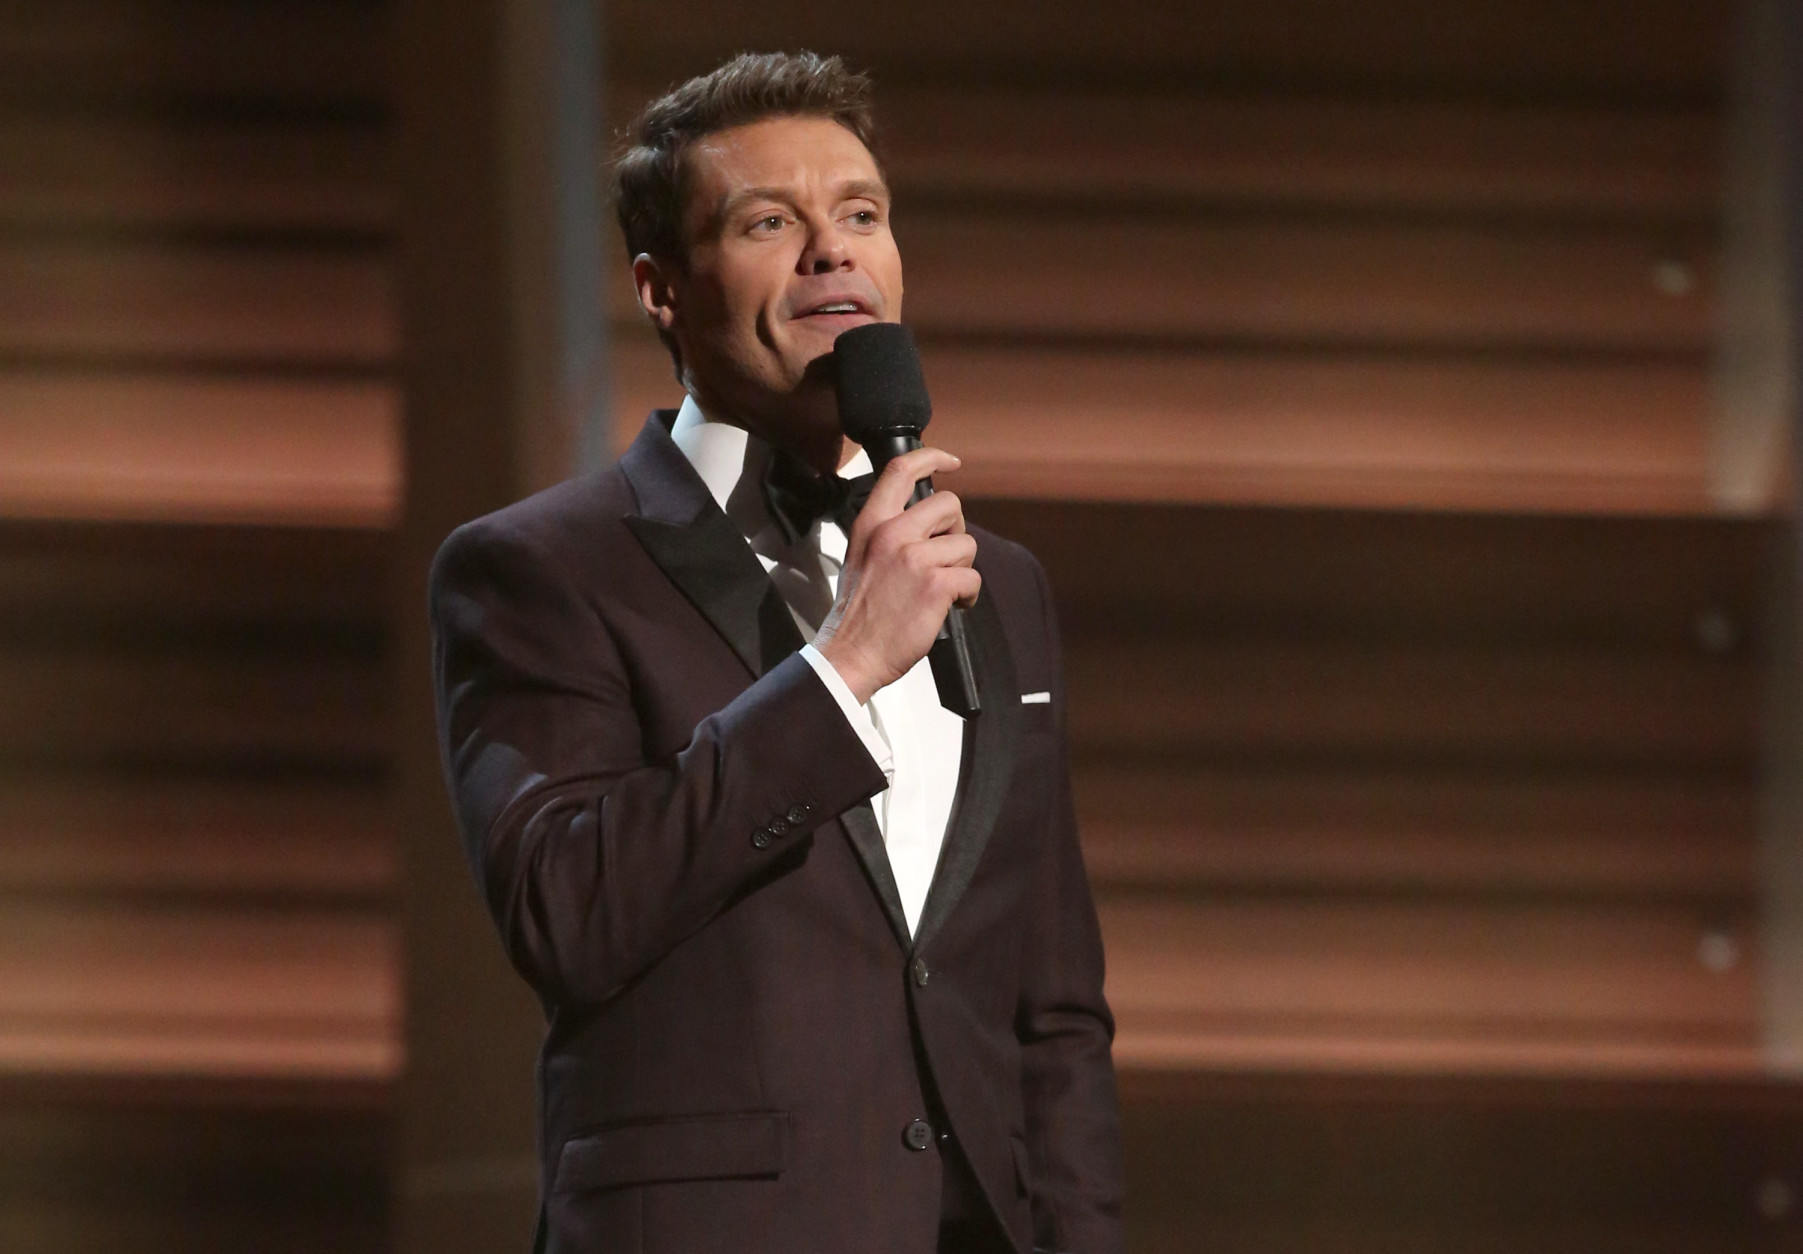 Ryan Seacrest introduces a performance by Little Big Town at the 58th annual Grammy Awards on Monday, Feb. 15, 2016, in Los Angeles. (Photo by Matt Sayles/Invision/AP)